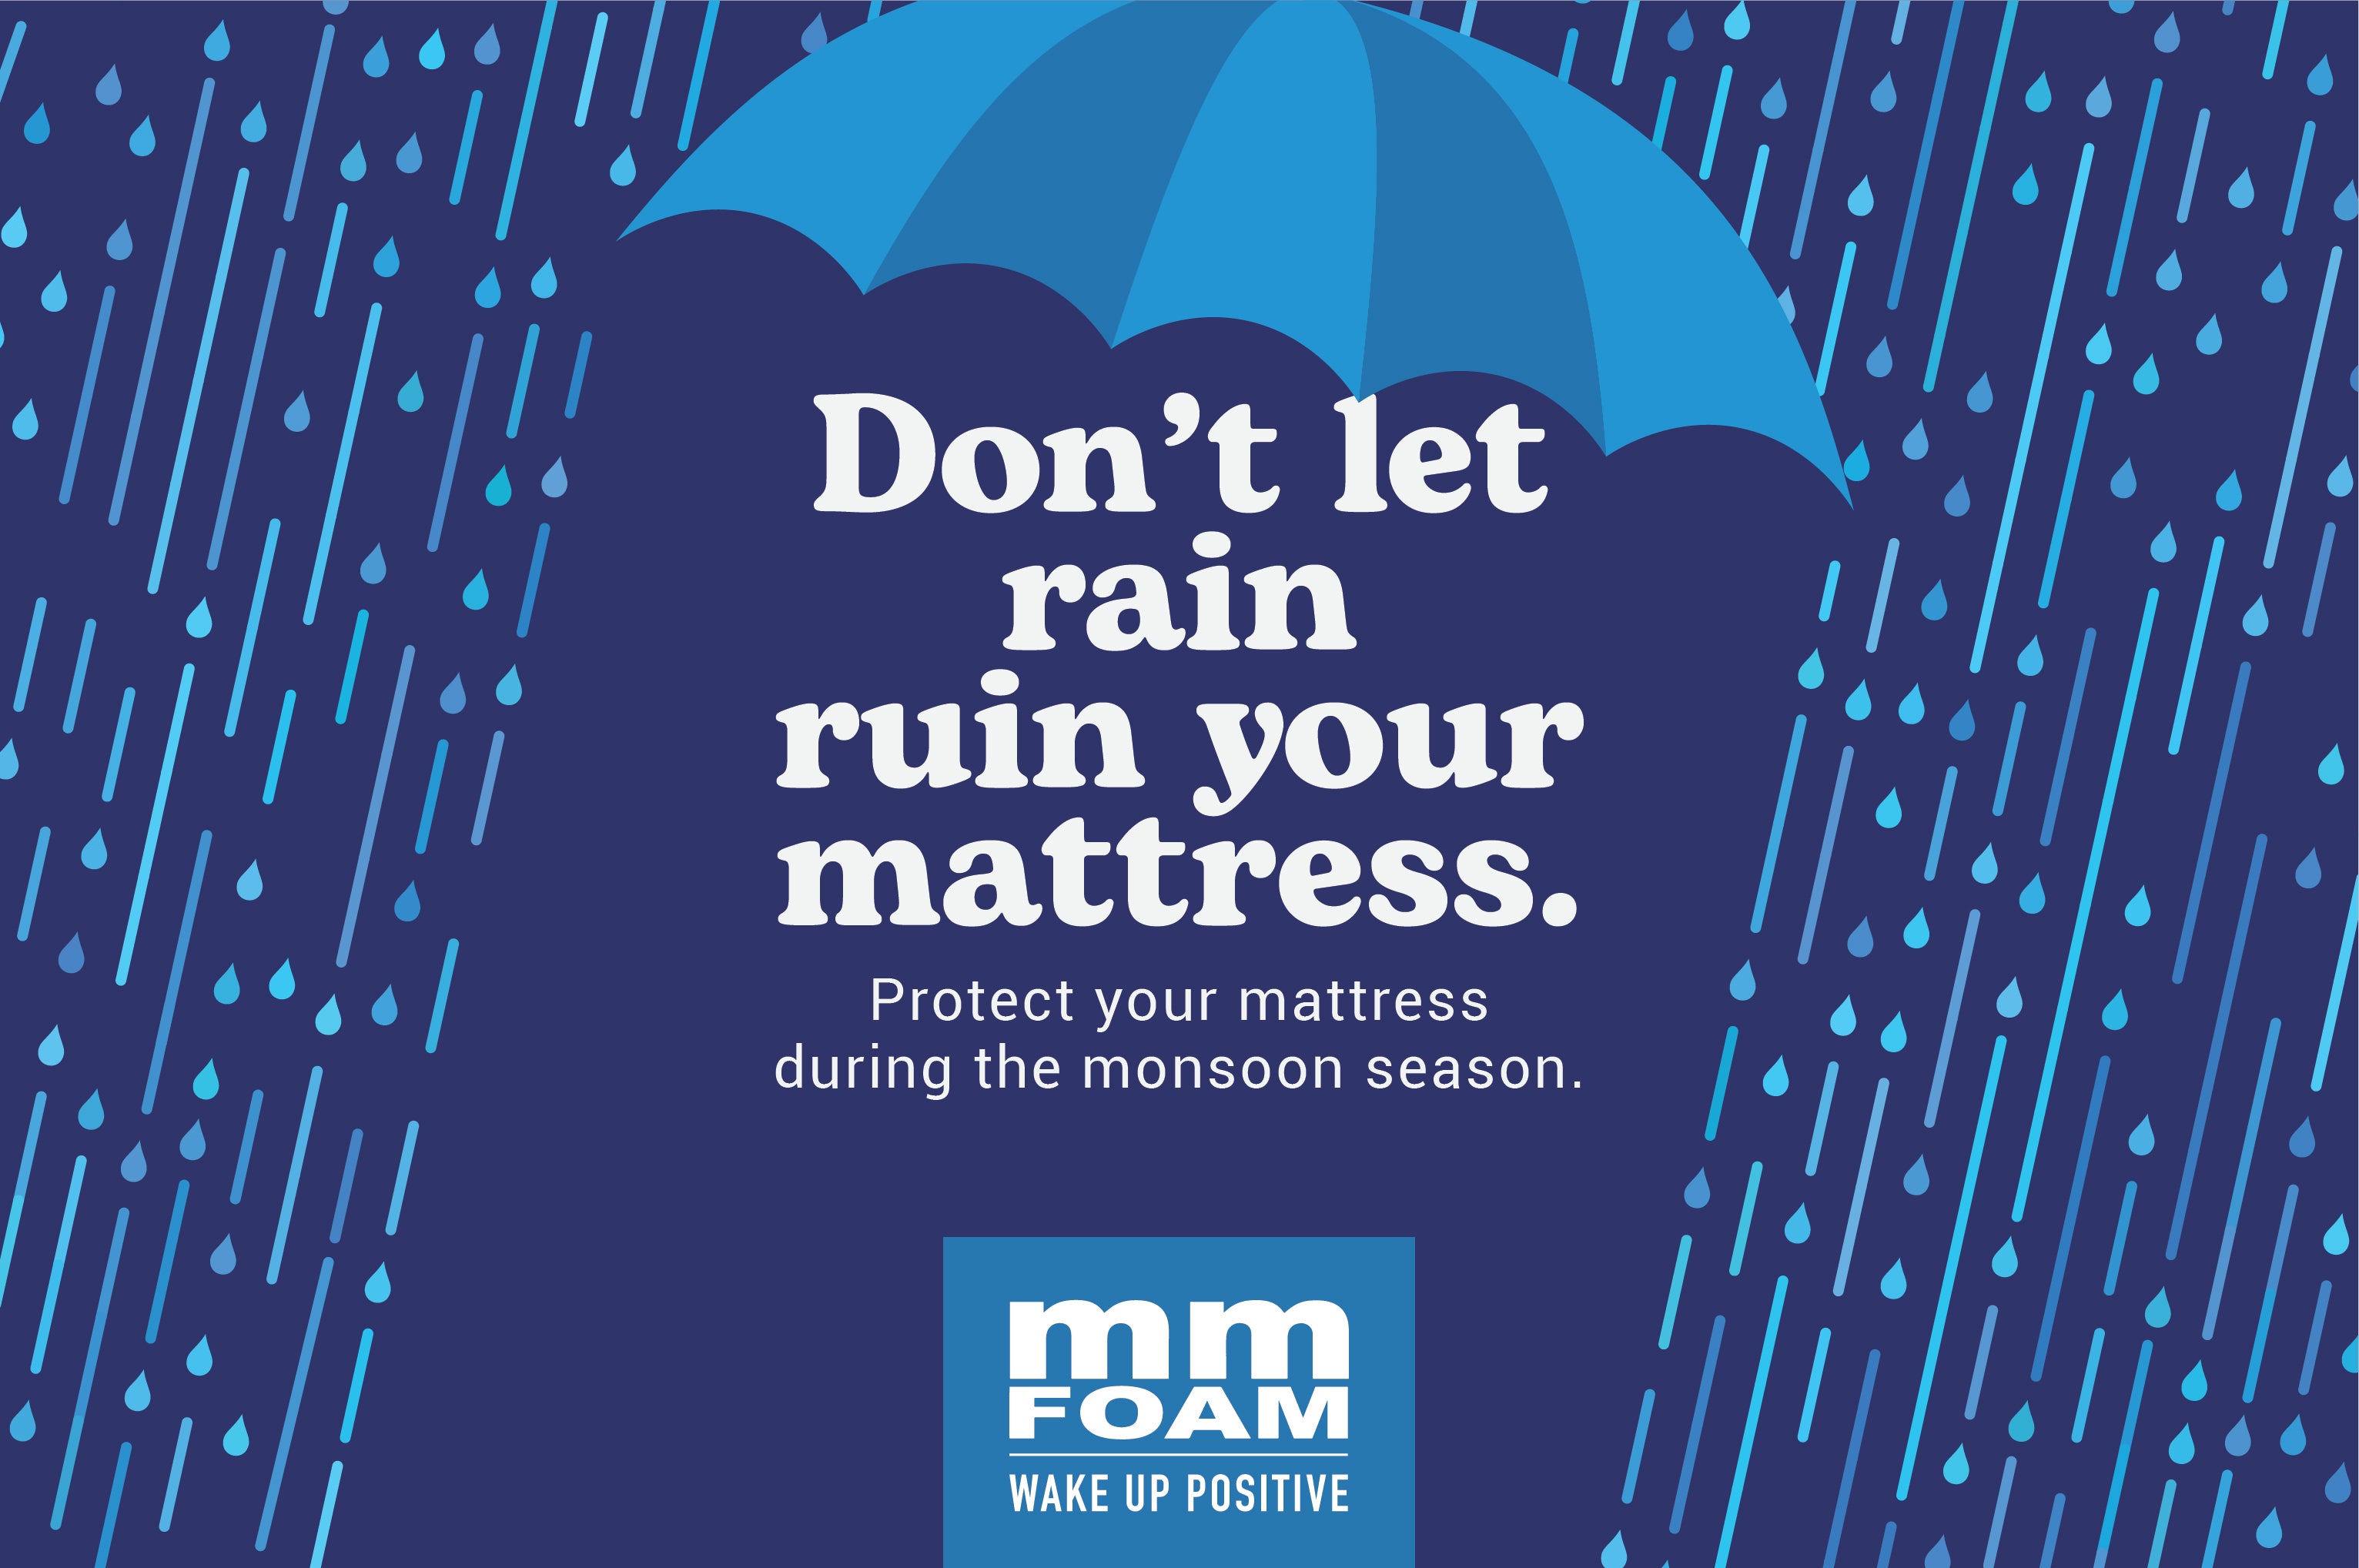 Tips to protect mattress during monsoon